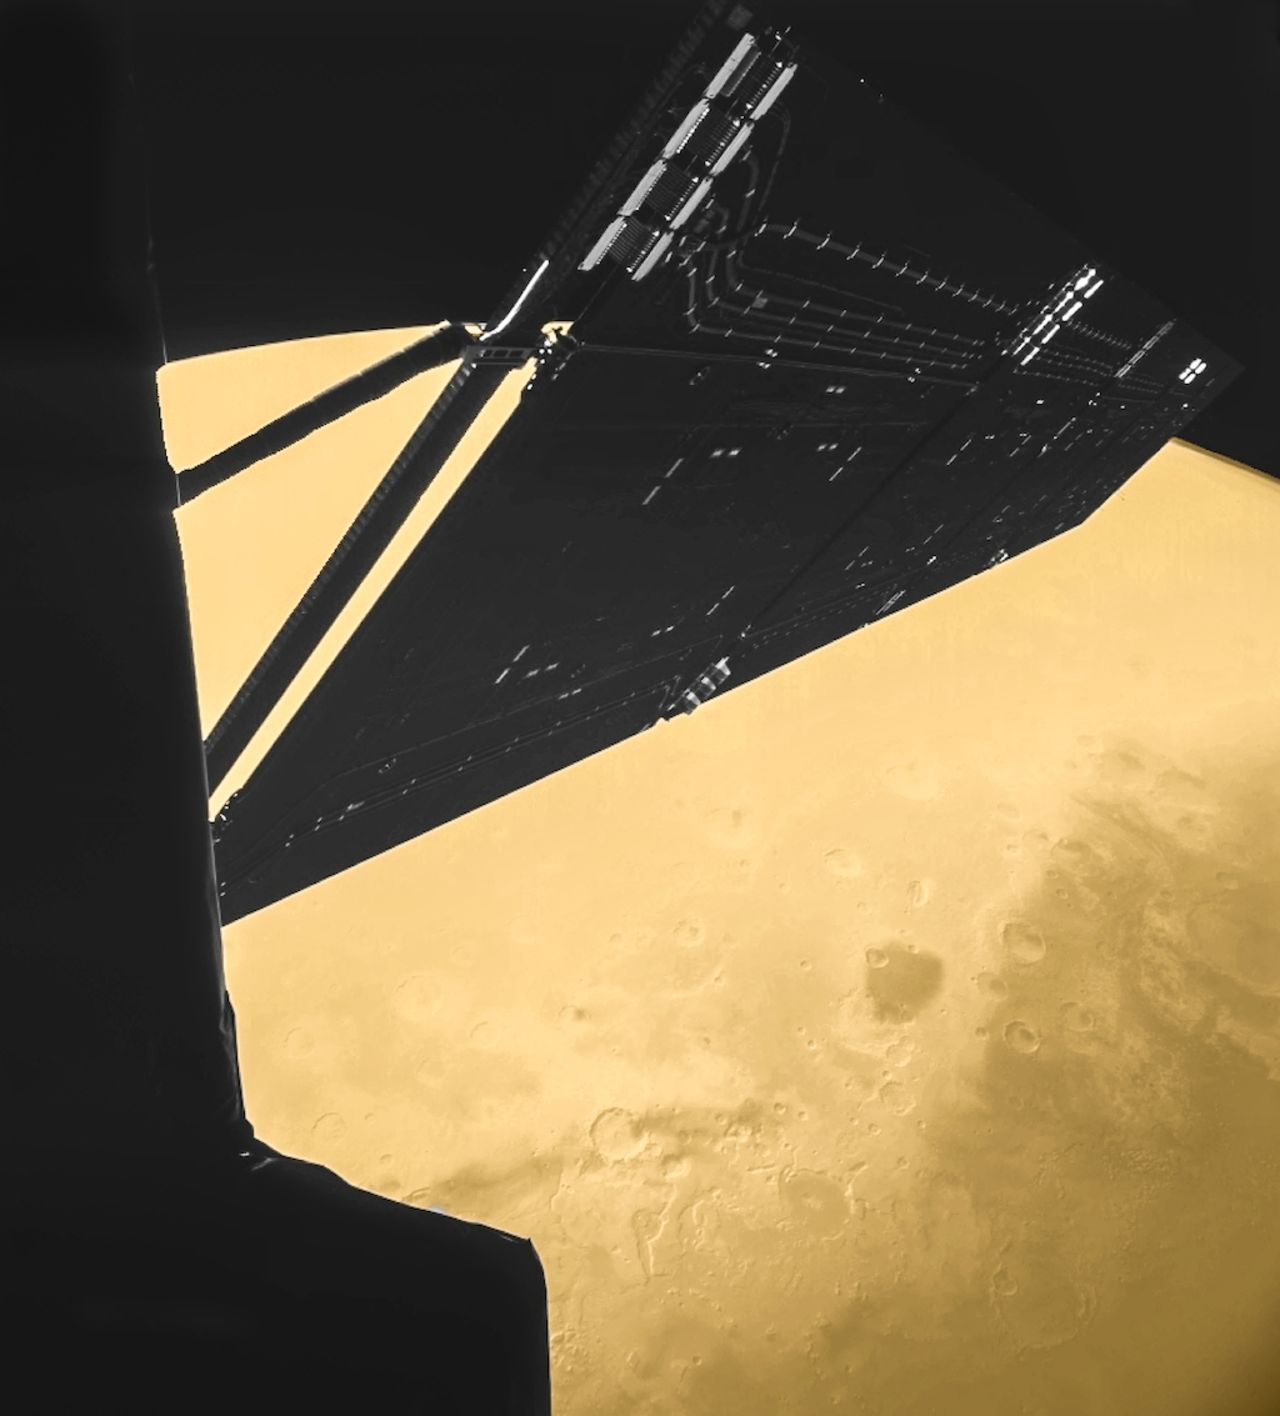 The European Space Agency's Philae lander snapped a self-portrait with Mars glowing majestically in the background February 25, 2007. At the time of selfie, the orbiter was just 1000 kilometers away from the planet. 